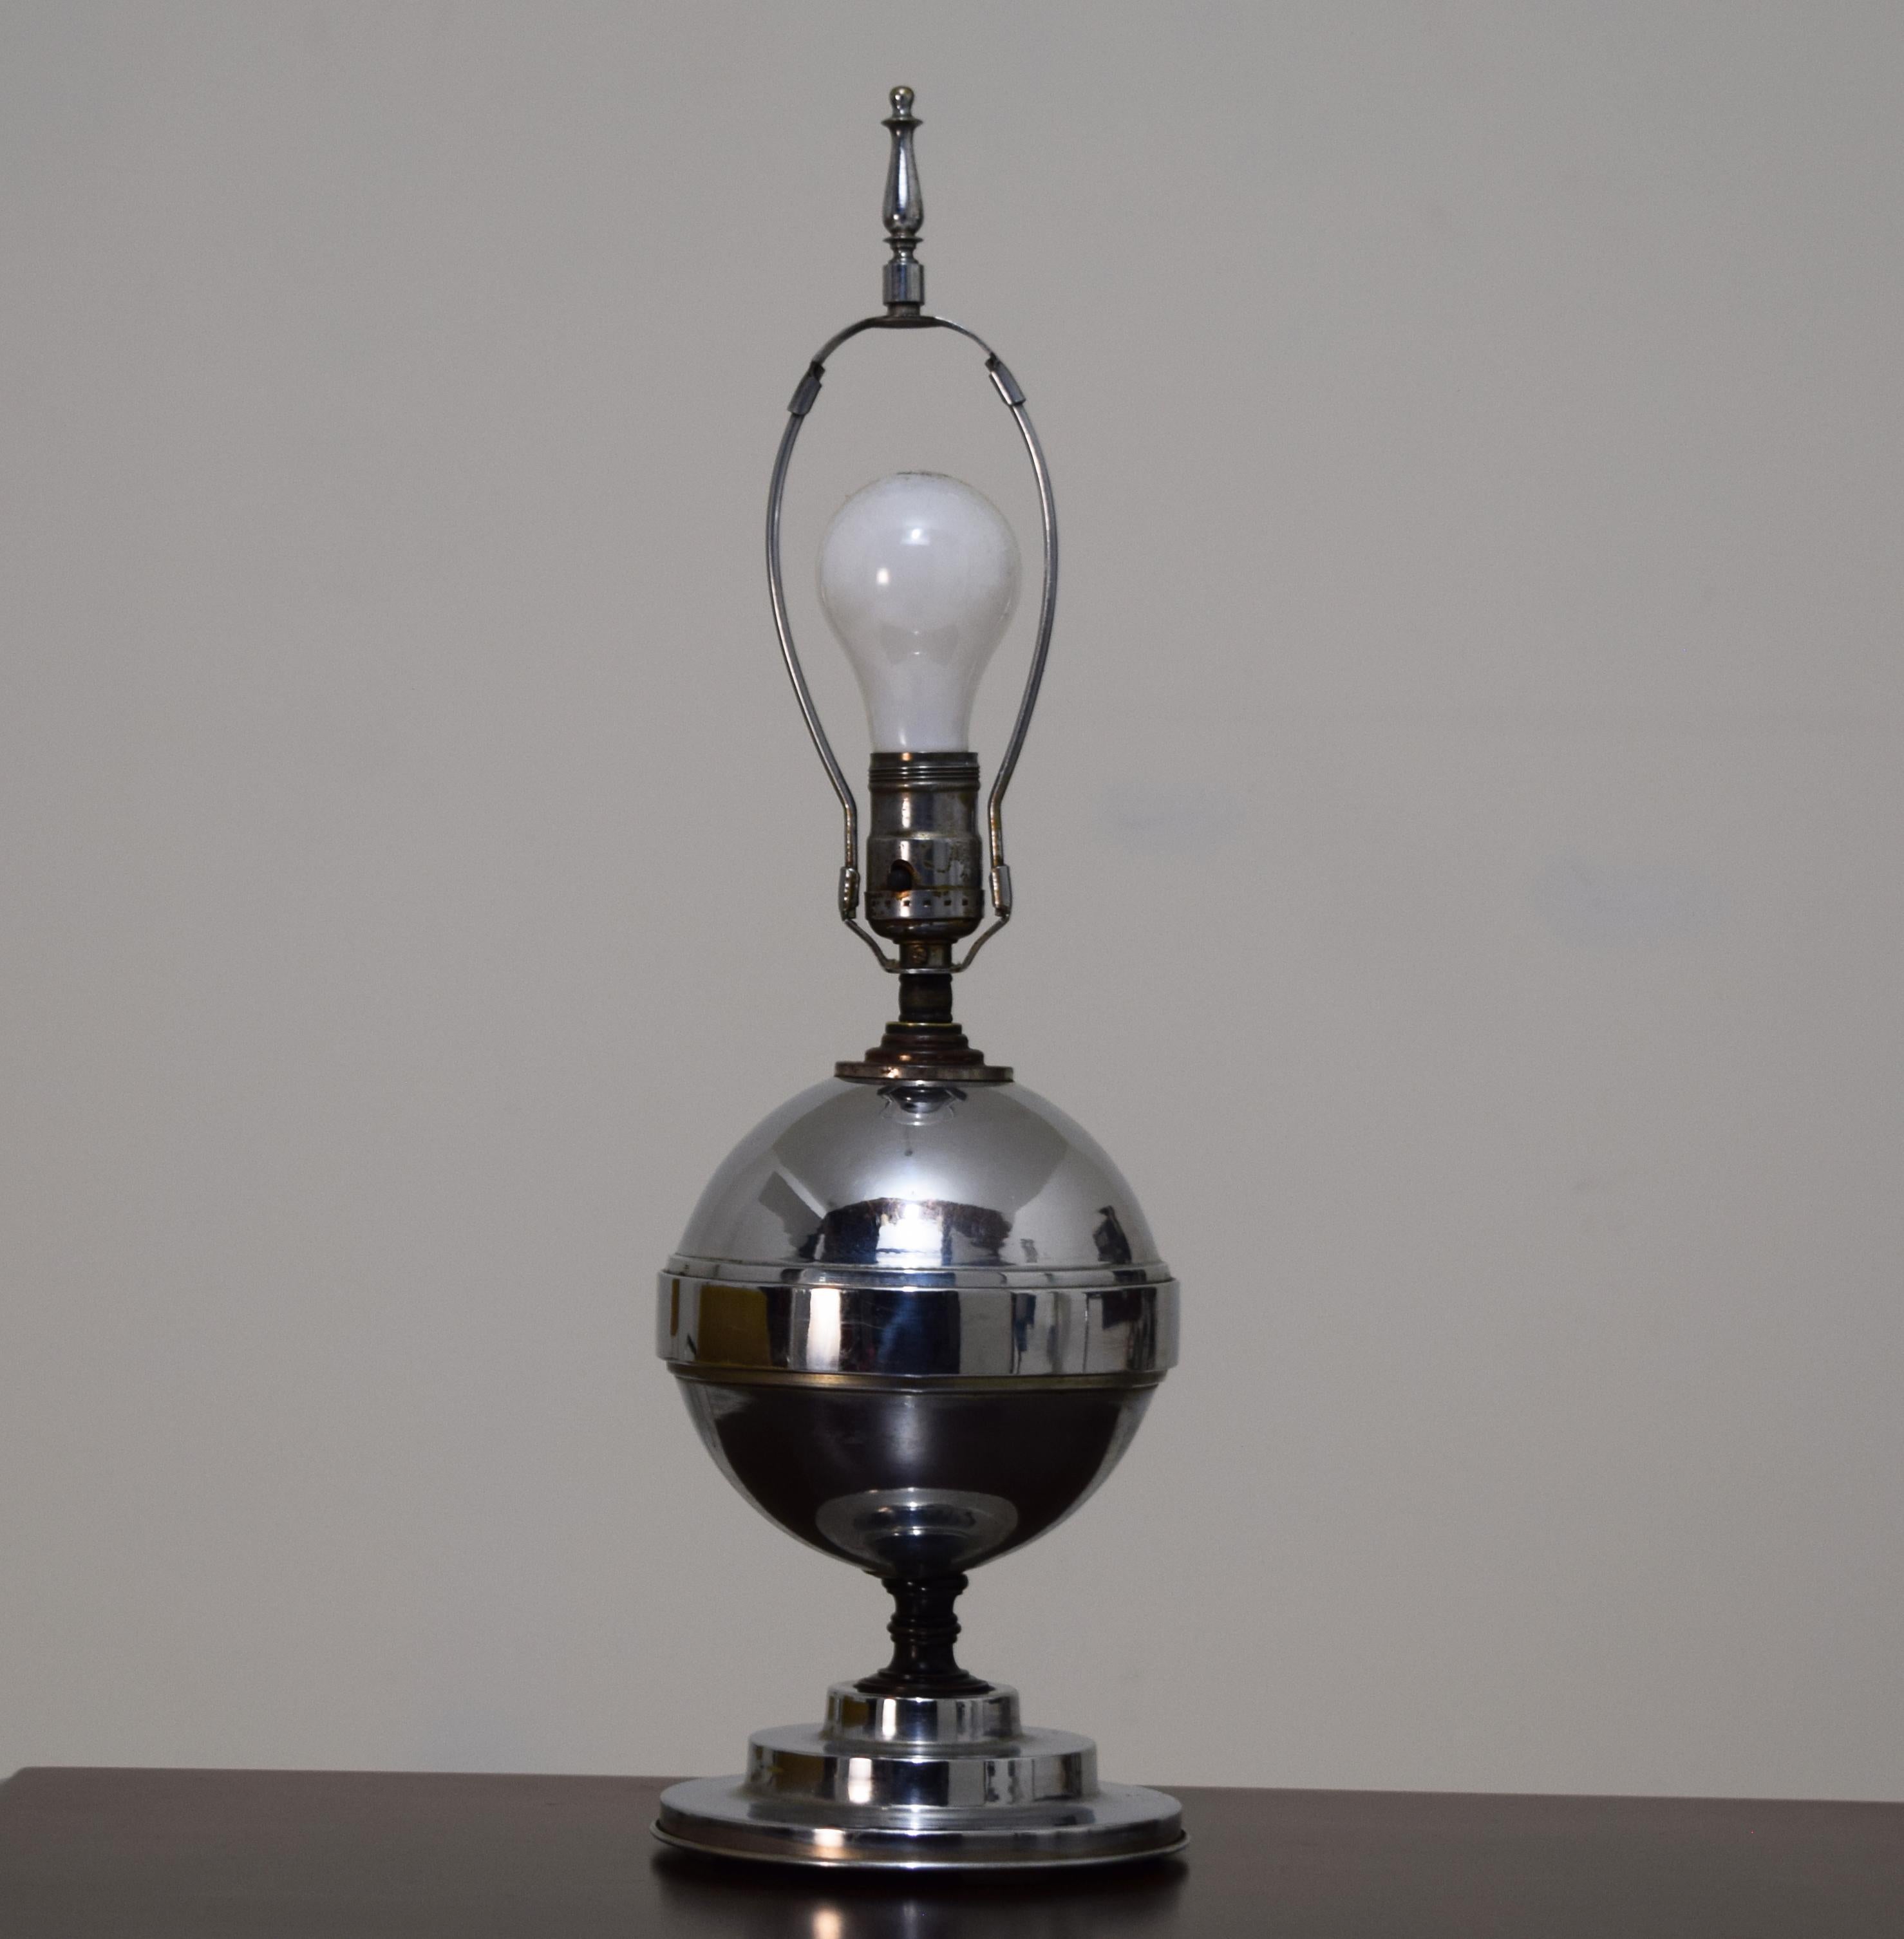 Table Lamp 1935. Steel and chrome.
Measures: 6